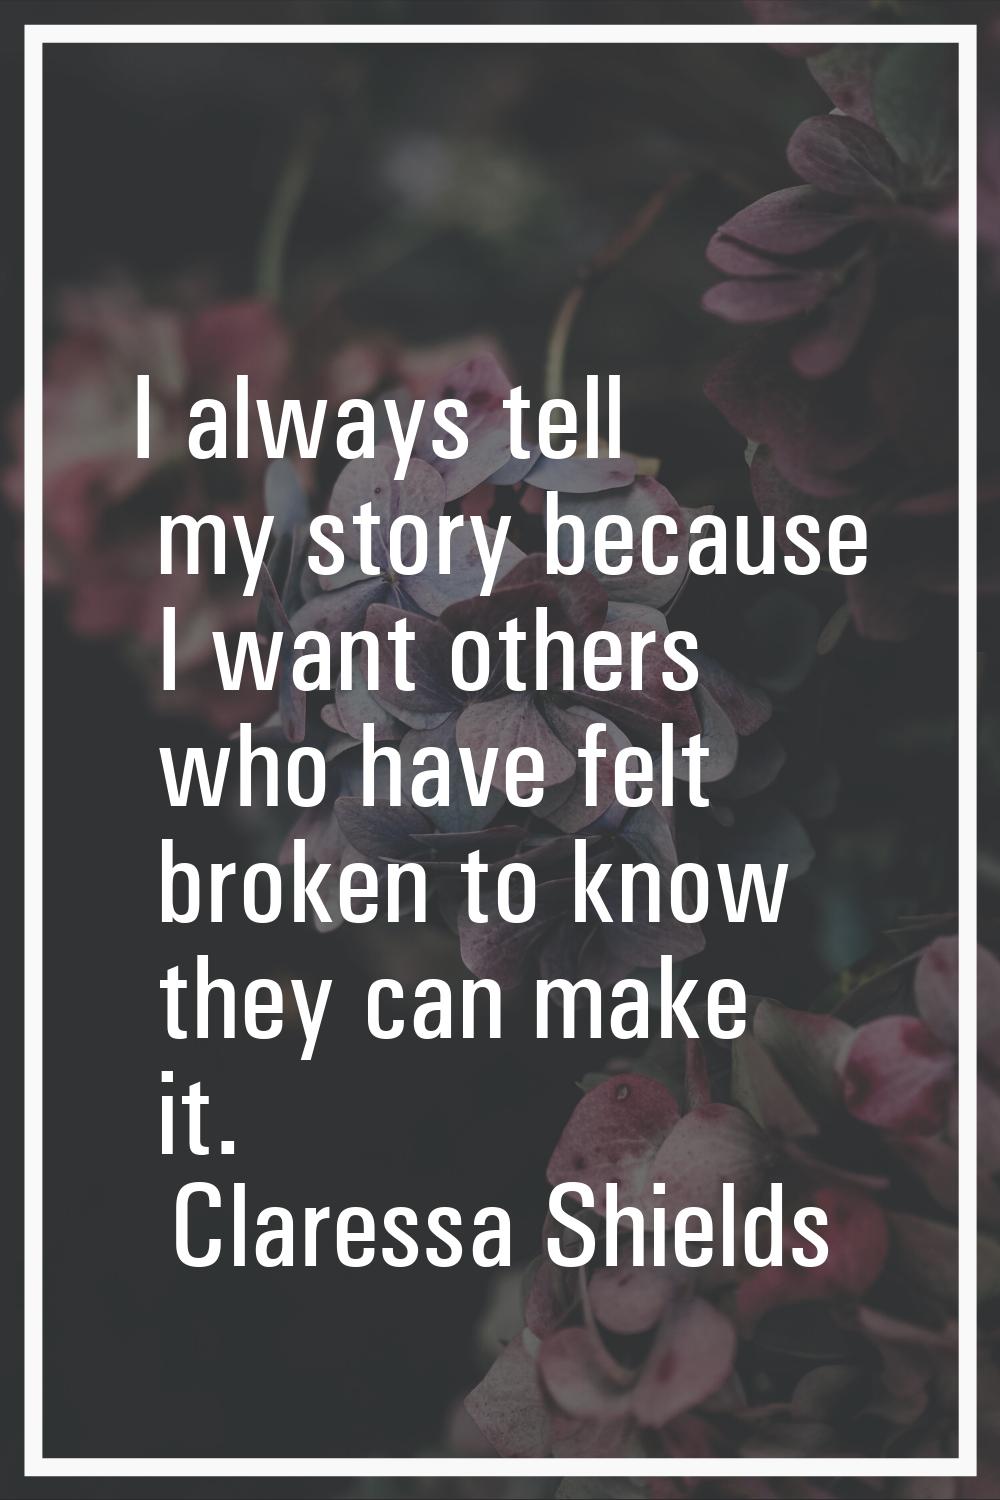 I always tell my story because I want others who have felt broken to know they can make it.